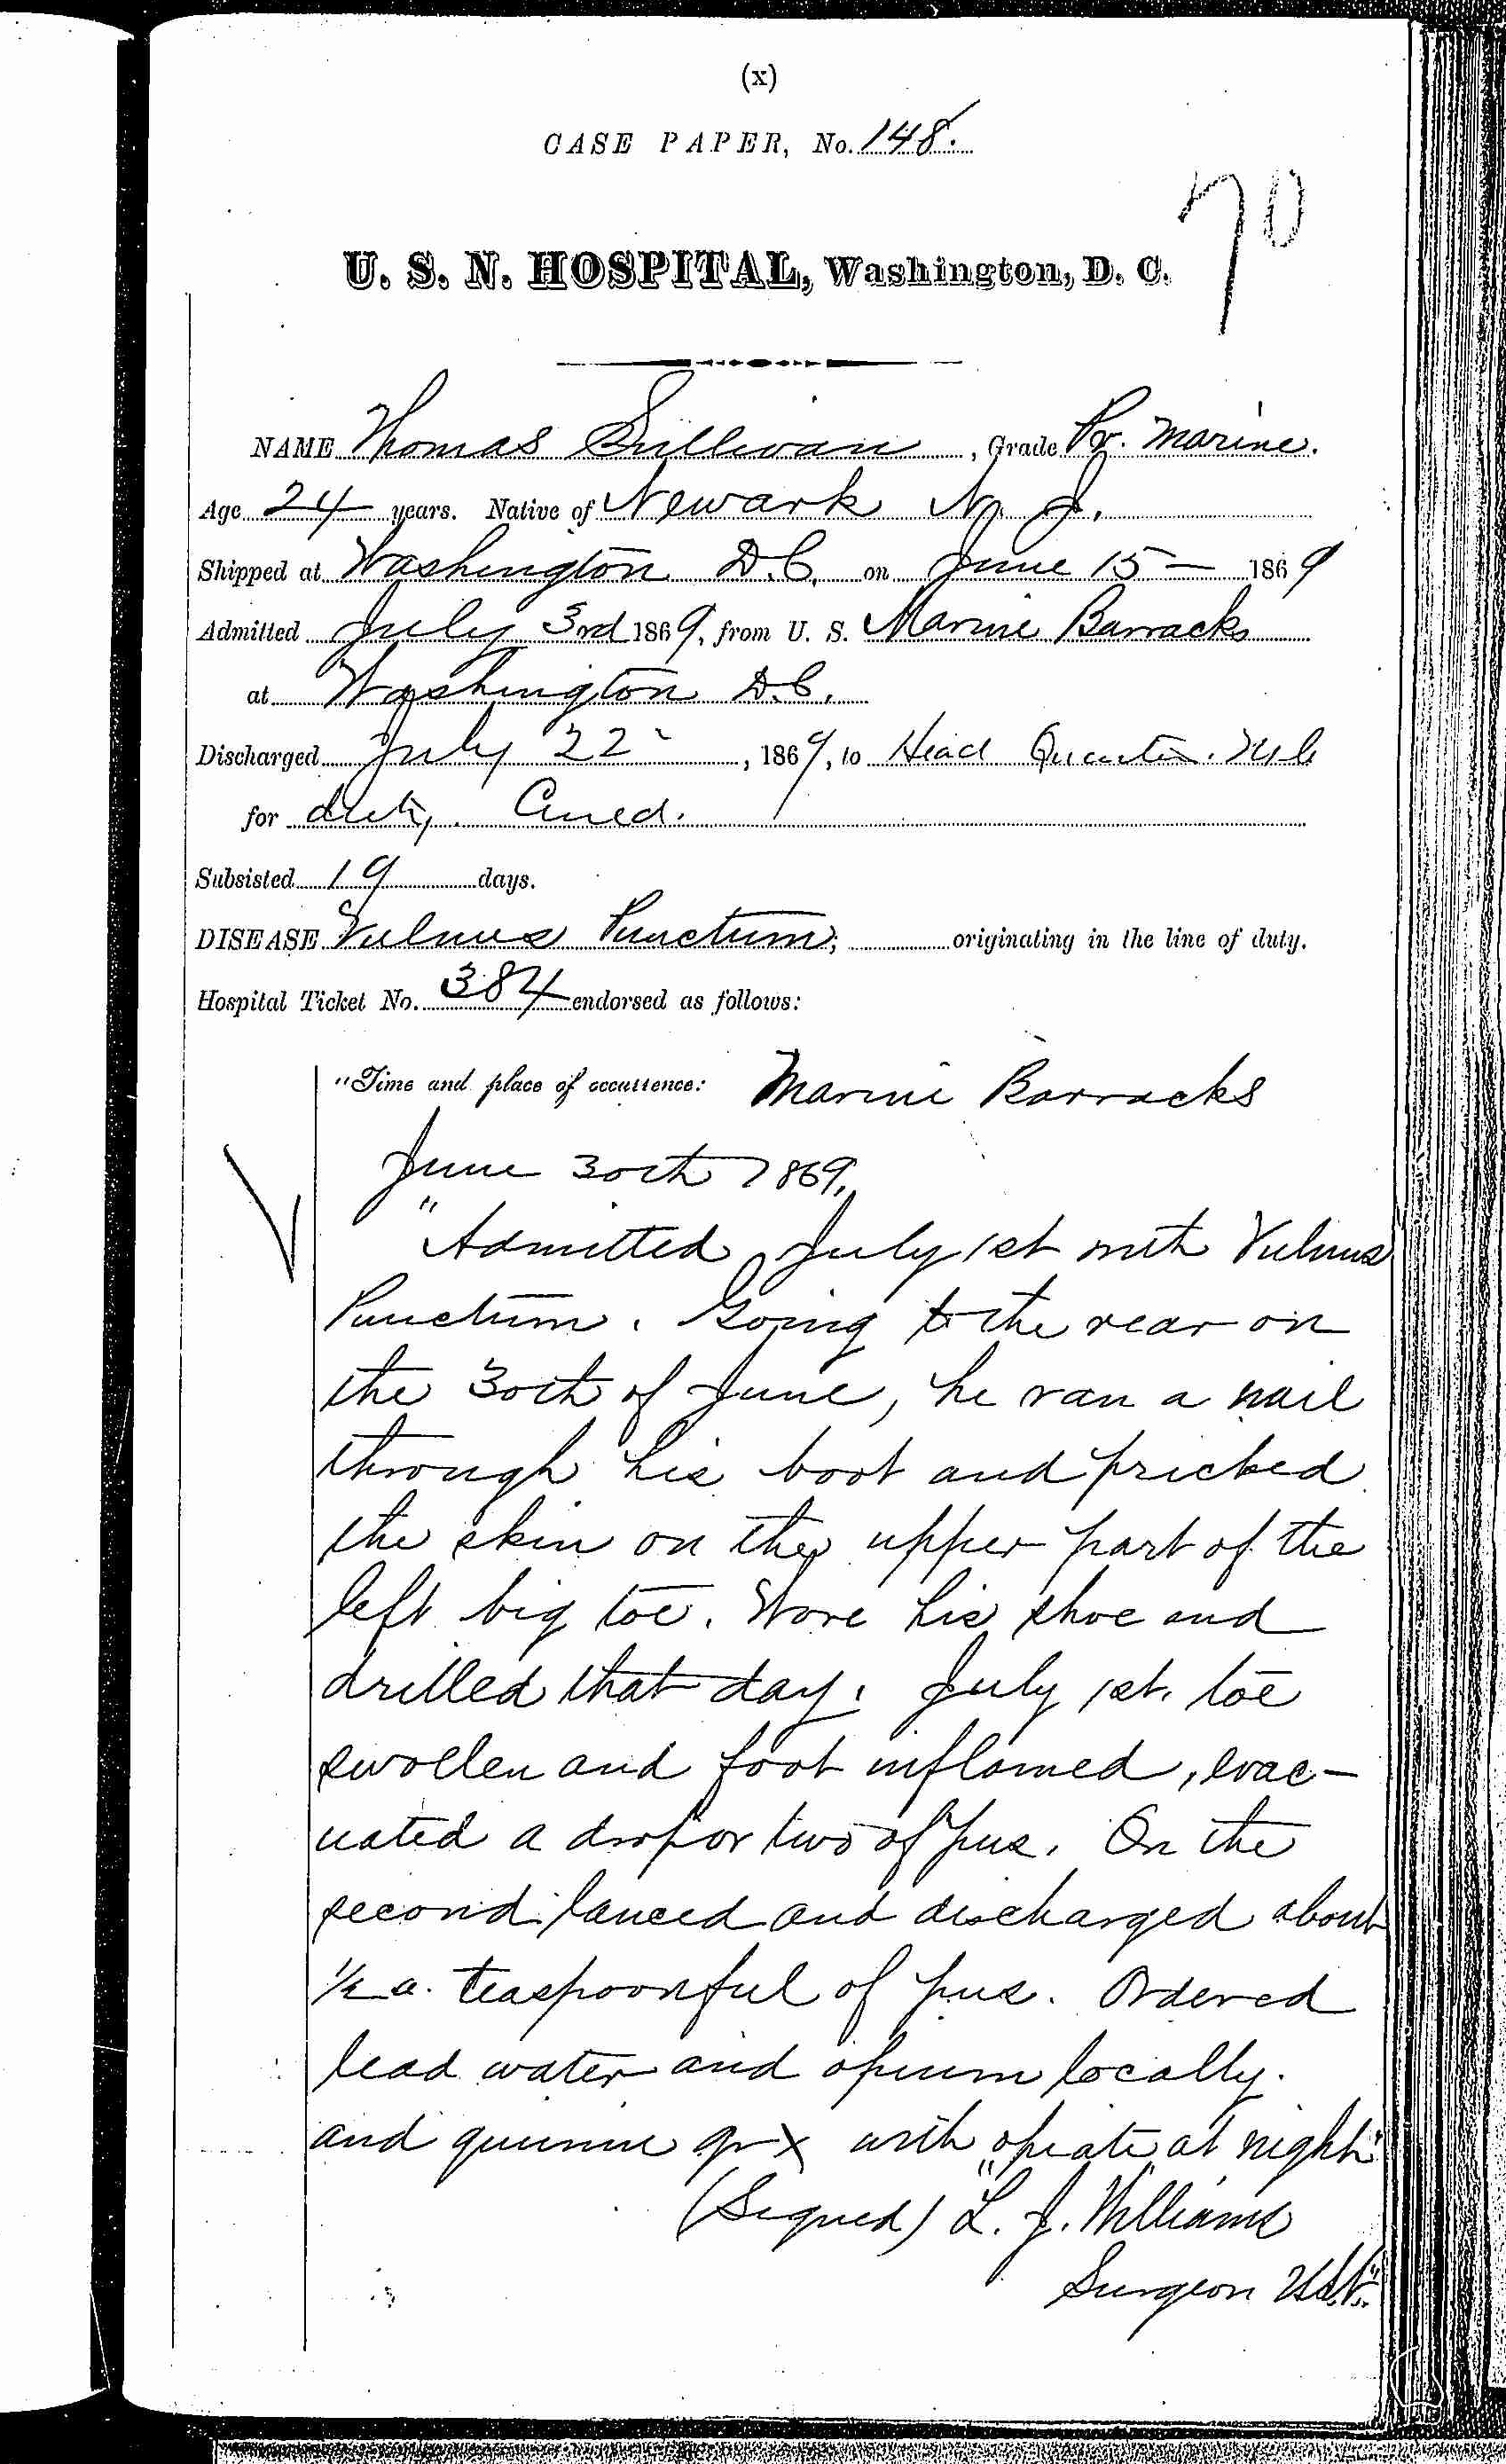 Entry for Thomas Sullivan (page 1 of 2) in the log Hospital Tickets and Case Papers - Naval Hospital - Washington, D.C. - 1868-69